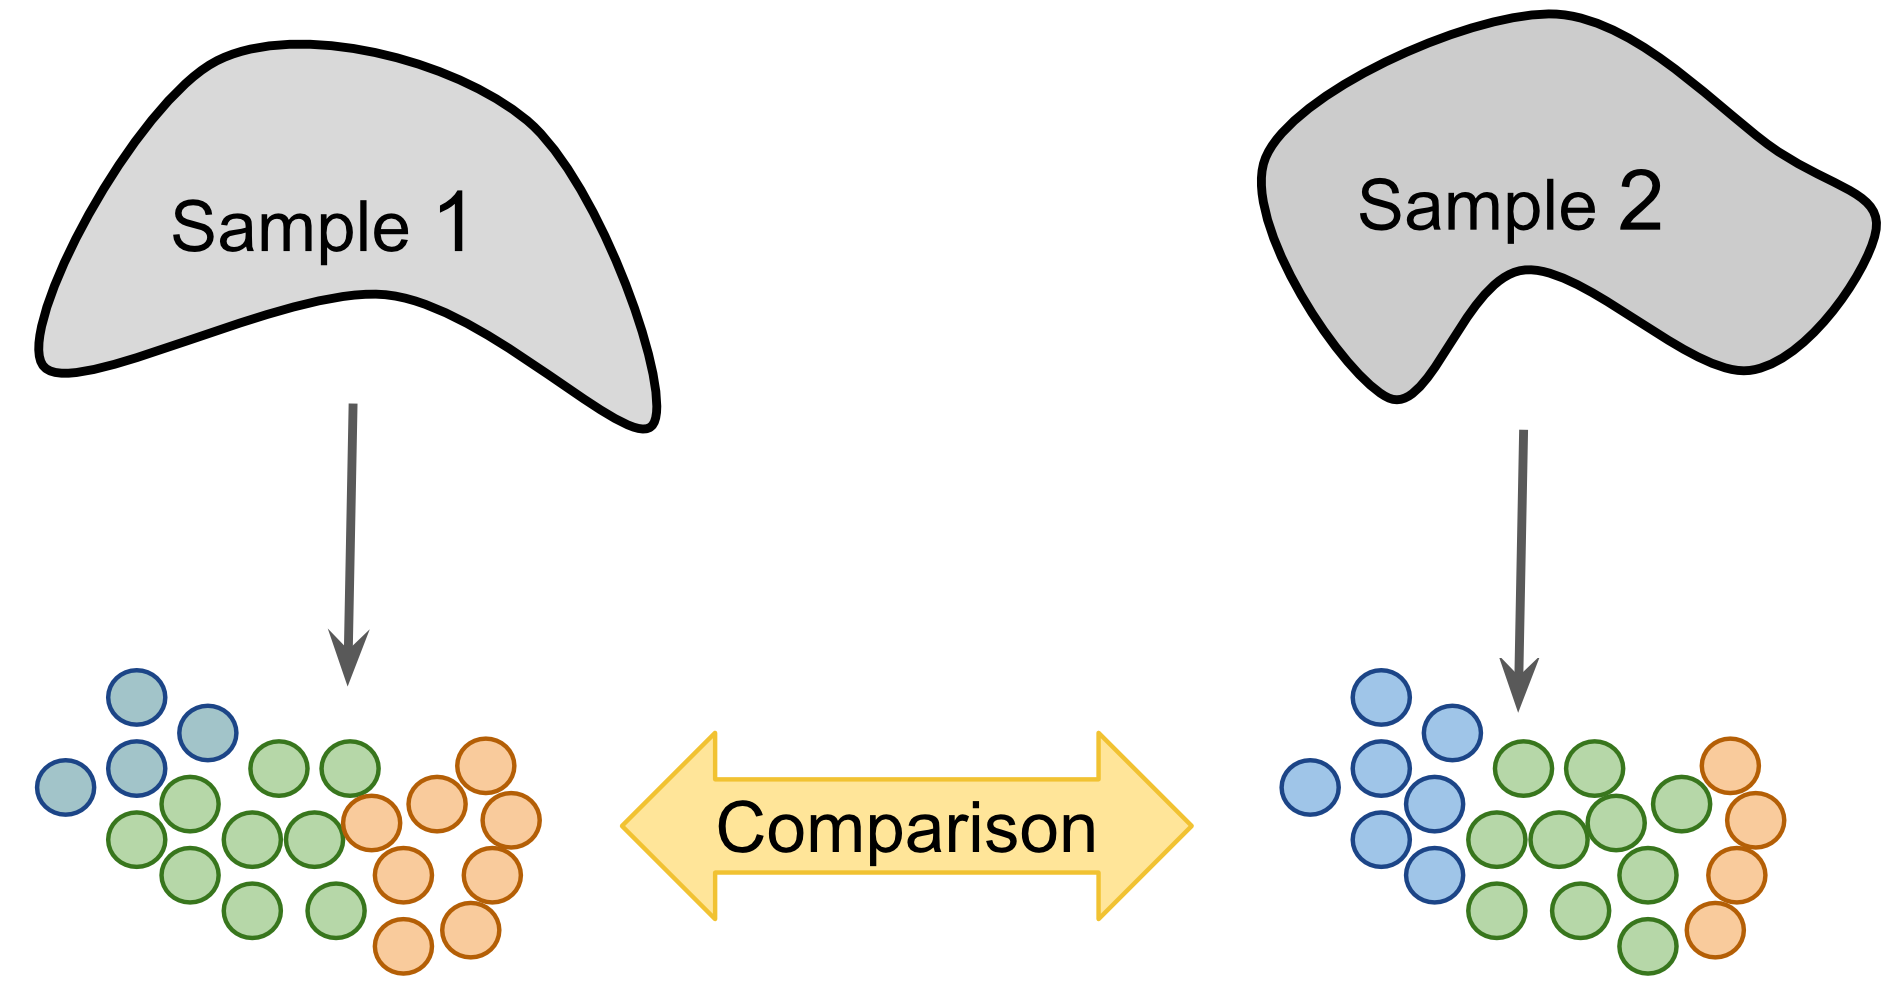 Label-centric dataset comparison can be used to compare the annotations of two different samples.